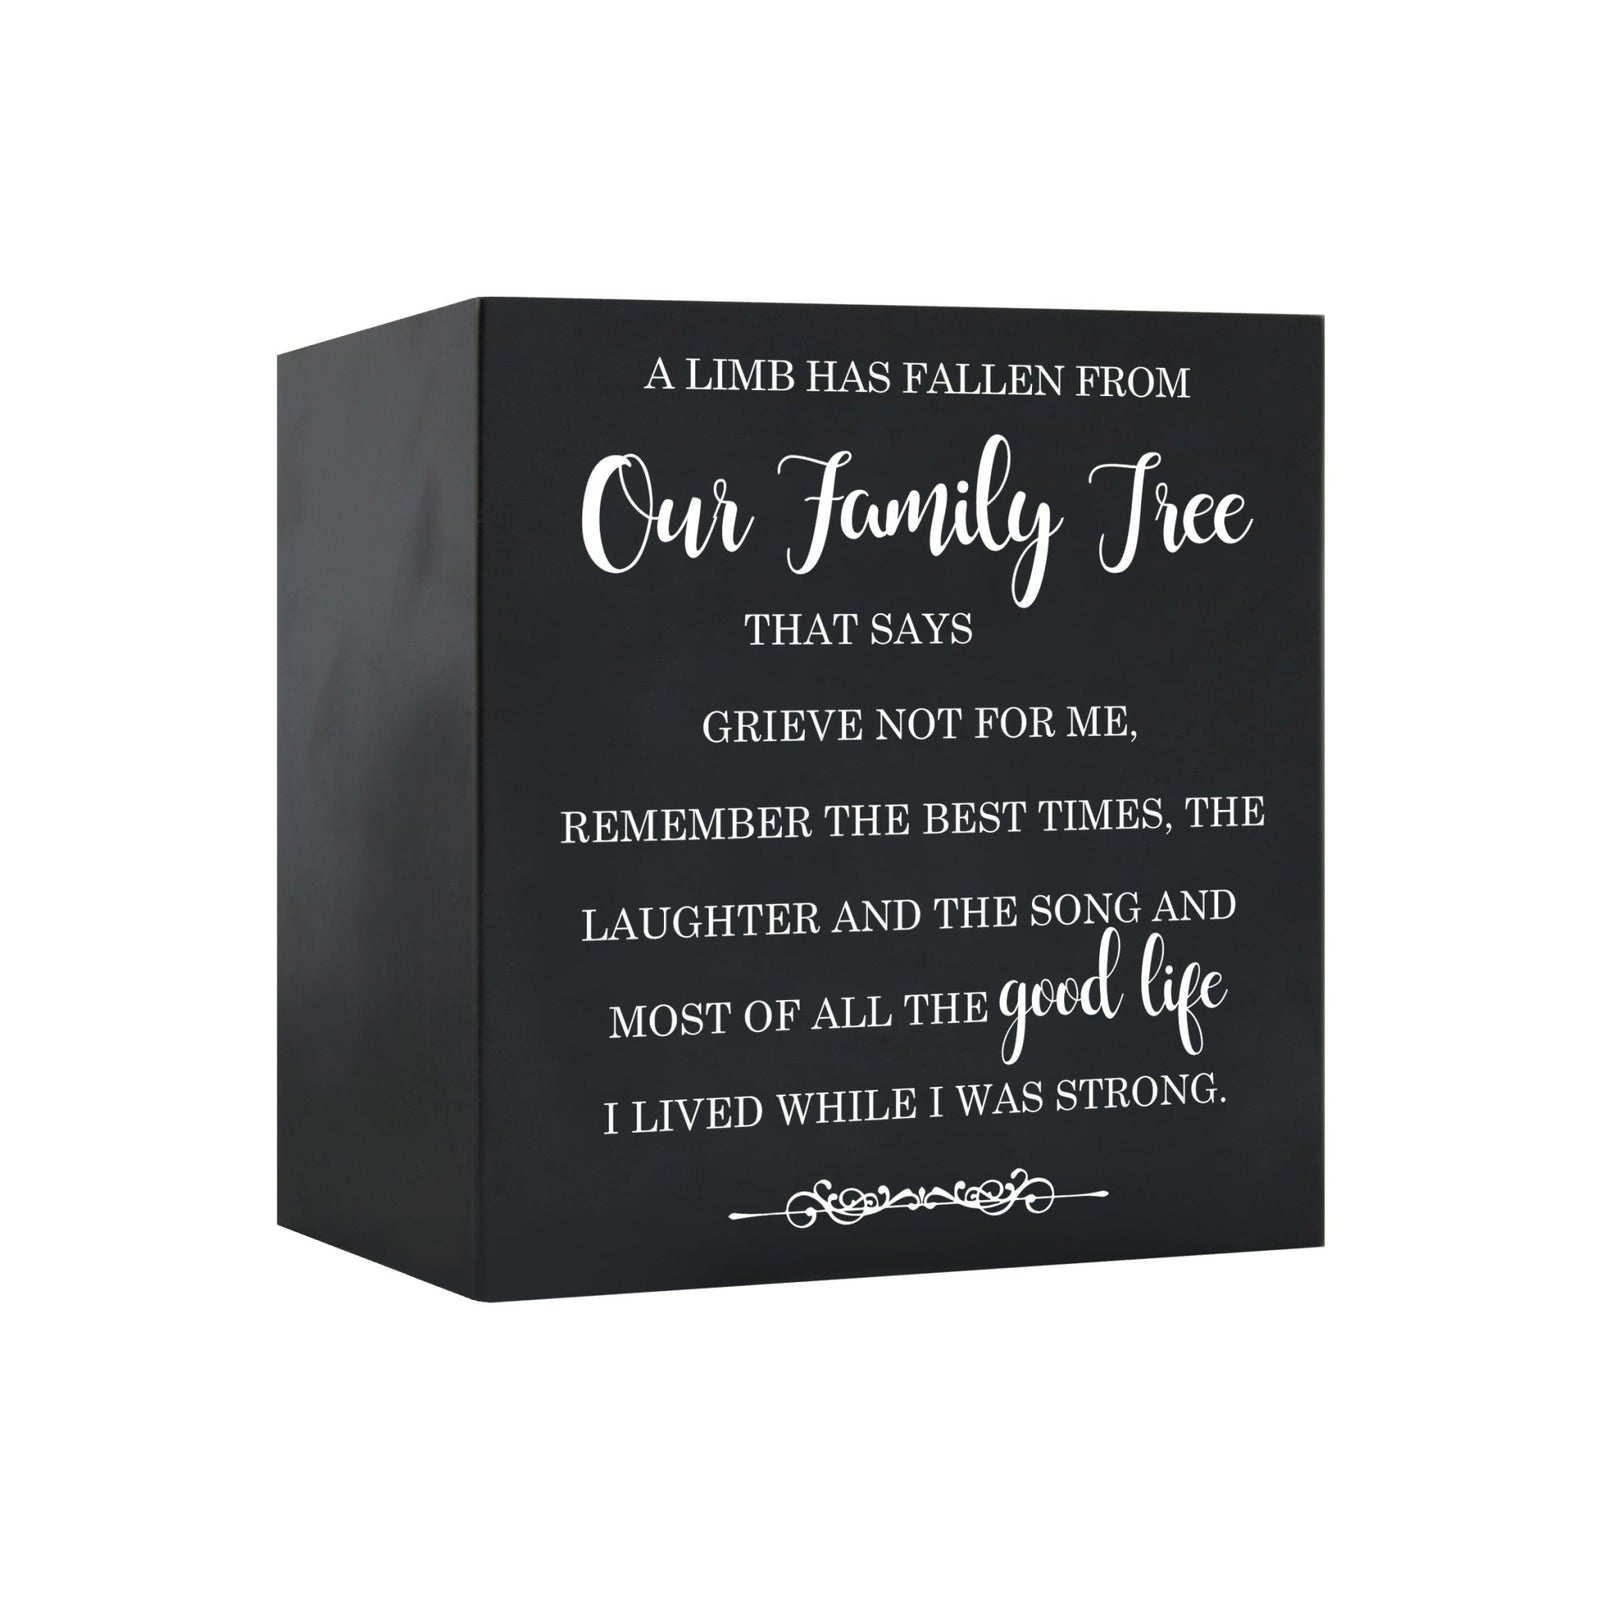 Memorial Bereavement Keepsake Cremation Shadow Box and Urn 6x6in Holds 53 Cu Inches Of Human Ashes A Limb Has Fallen - LifeSong Milestones